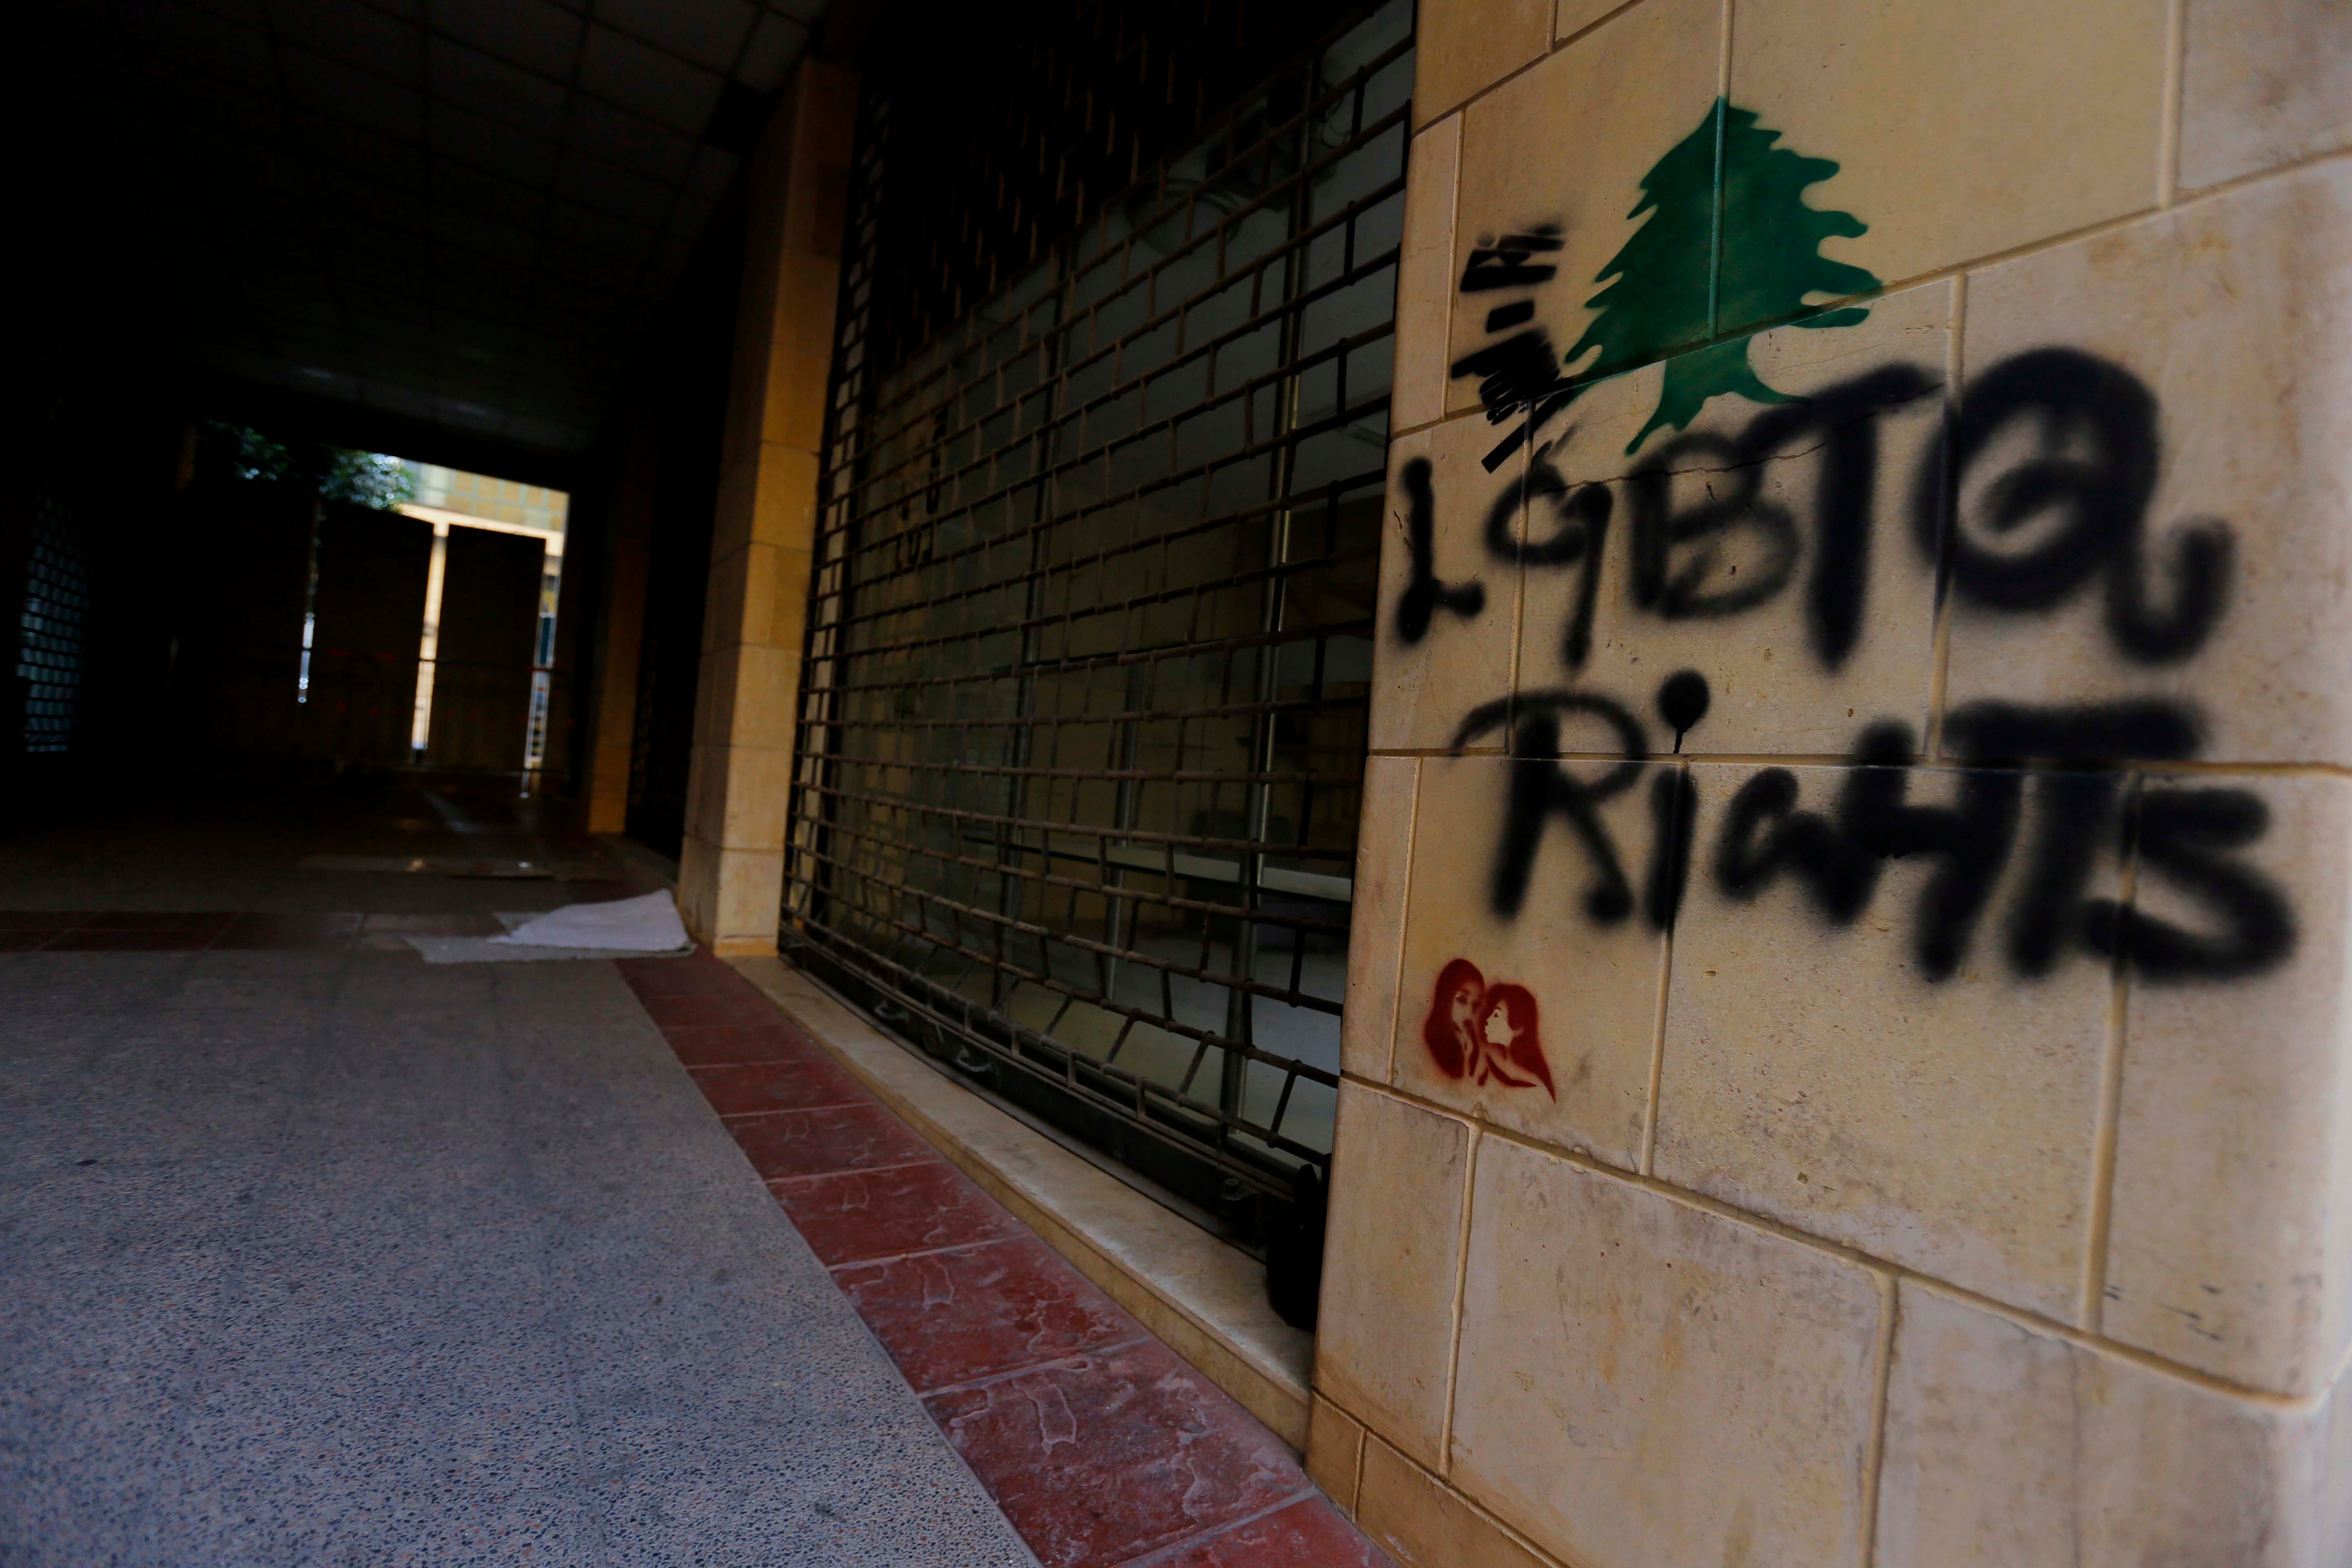 LGBTQ Rights graffiti spray-painted at a protest site in downtown Beirut. December 22, 2019. © 2019 Marwan Tahtah for Human Rights Watch